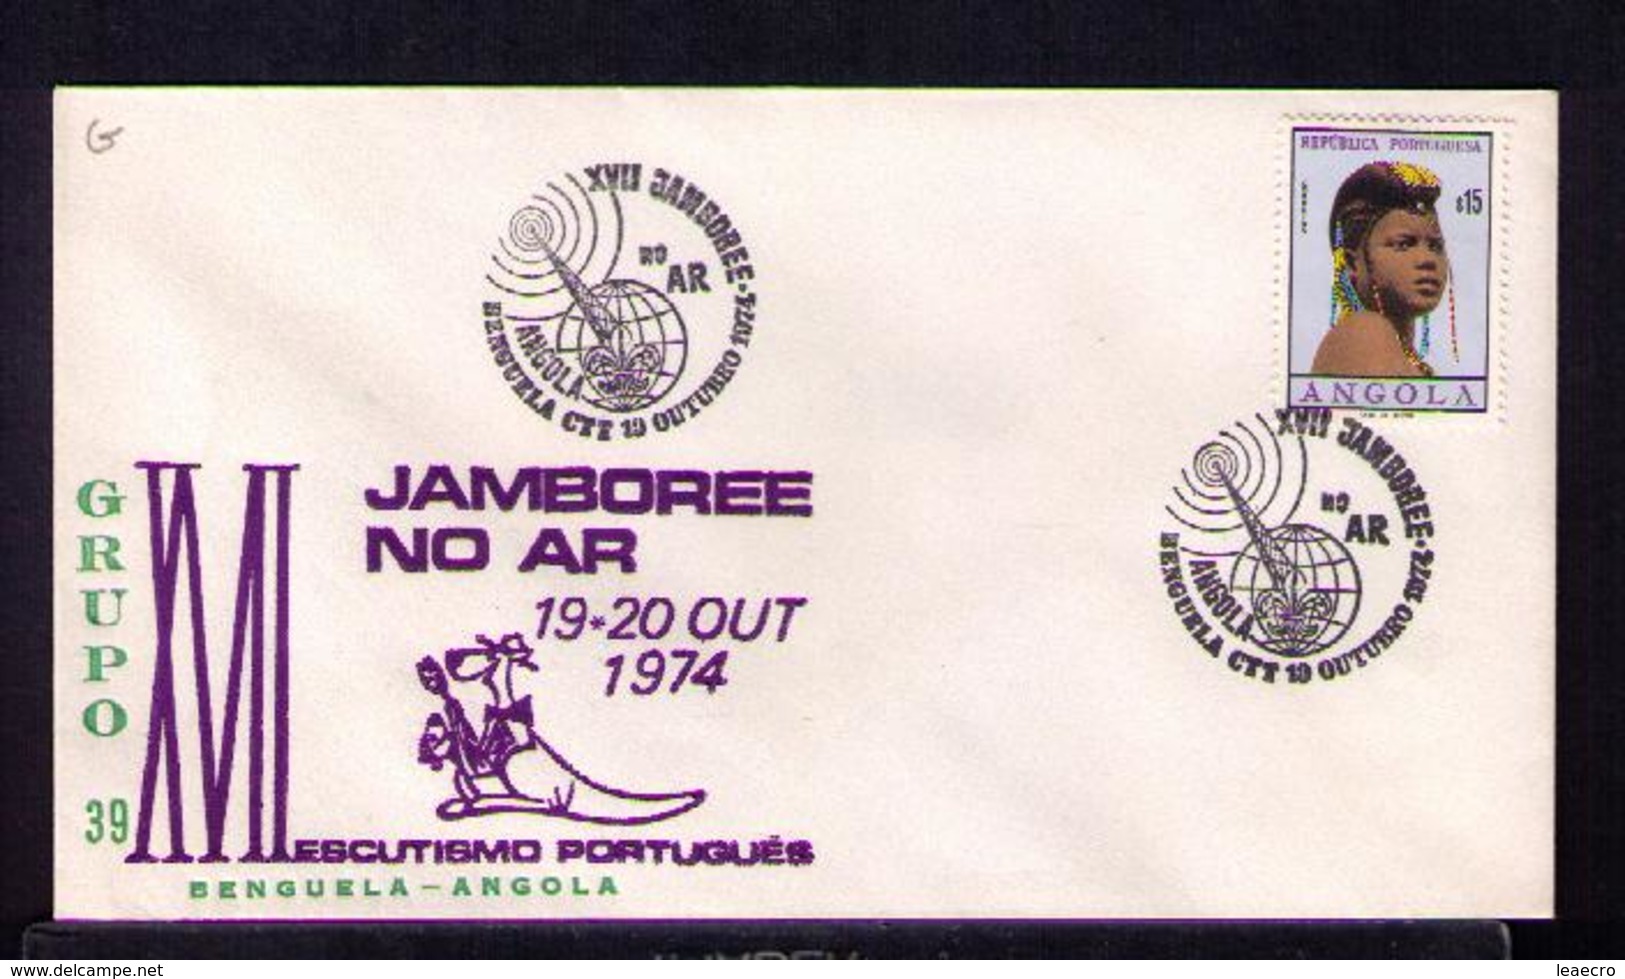 ANGOLA Benguela Cover Boyscouts GROUP39 Scouting Scoutisme JAMBOREE On AIR Radio 1974 Portugal Gc2744 - Lettres & Documents